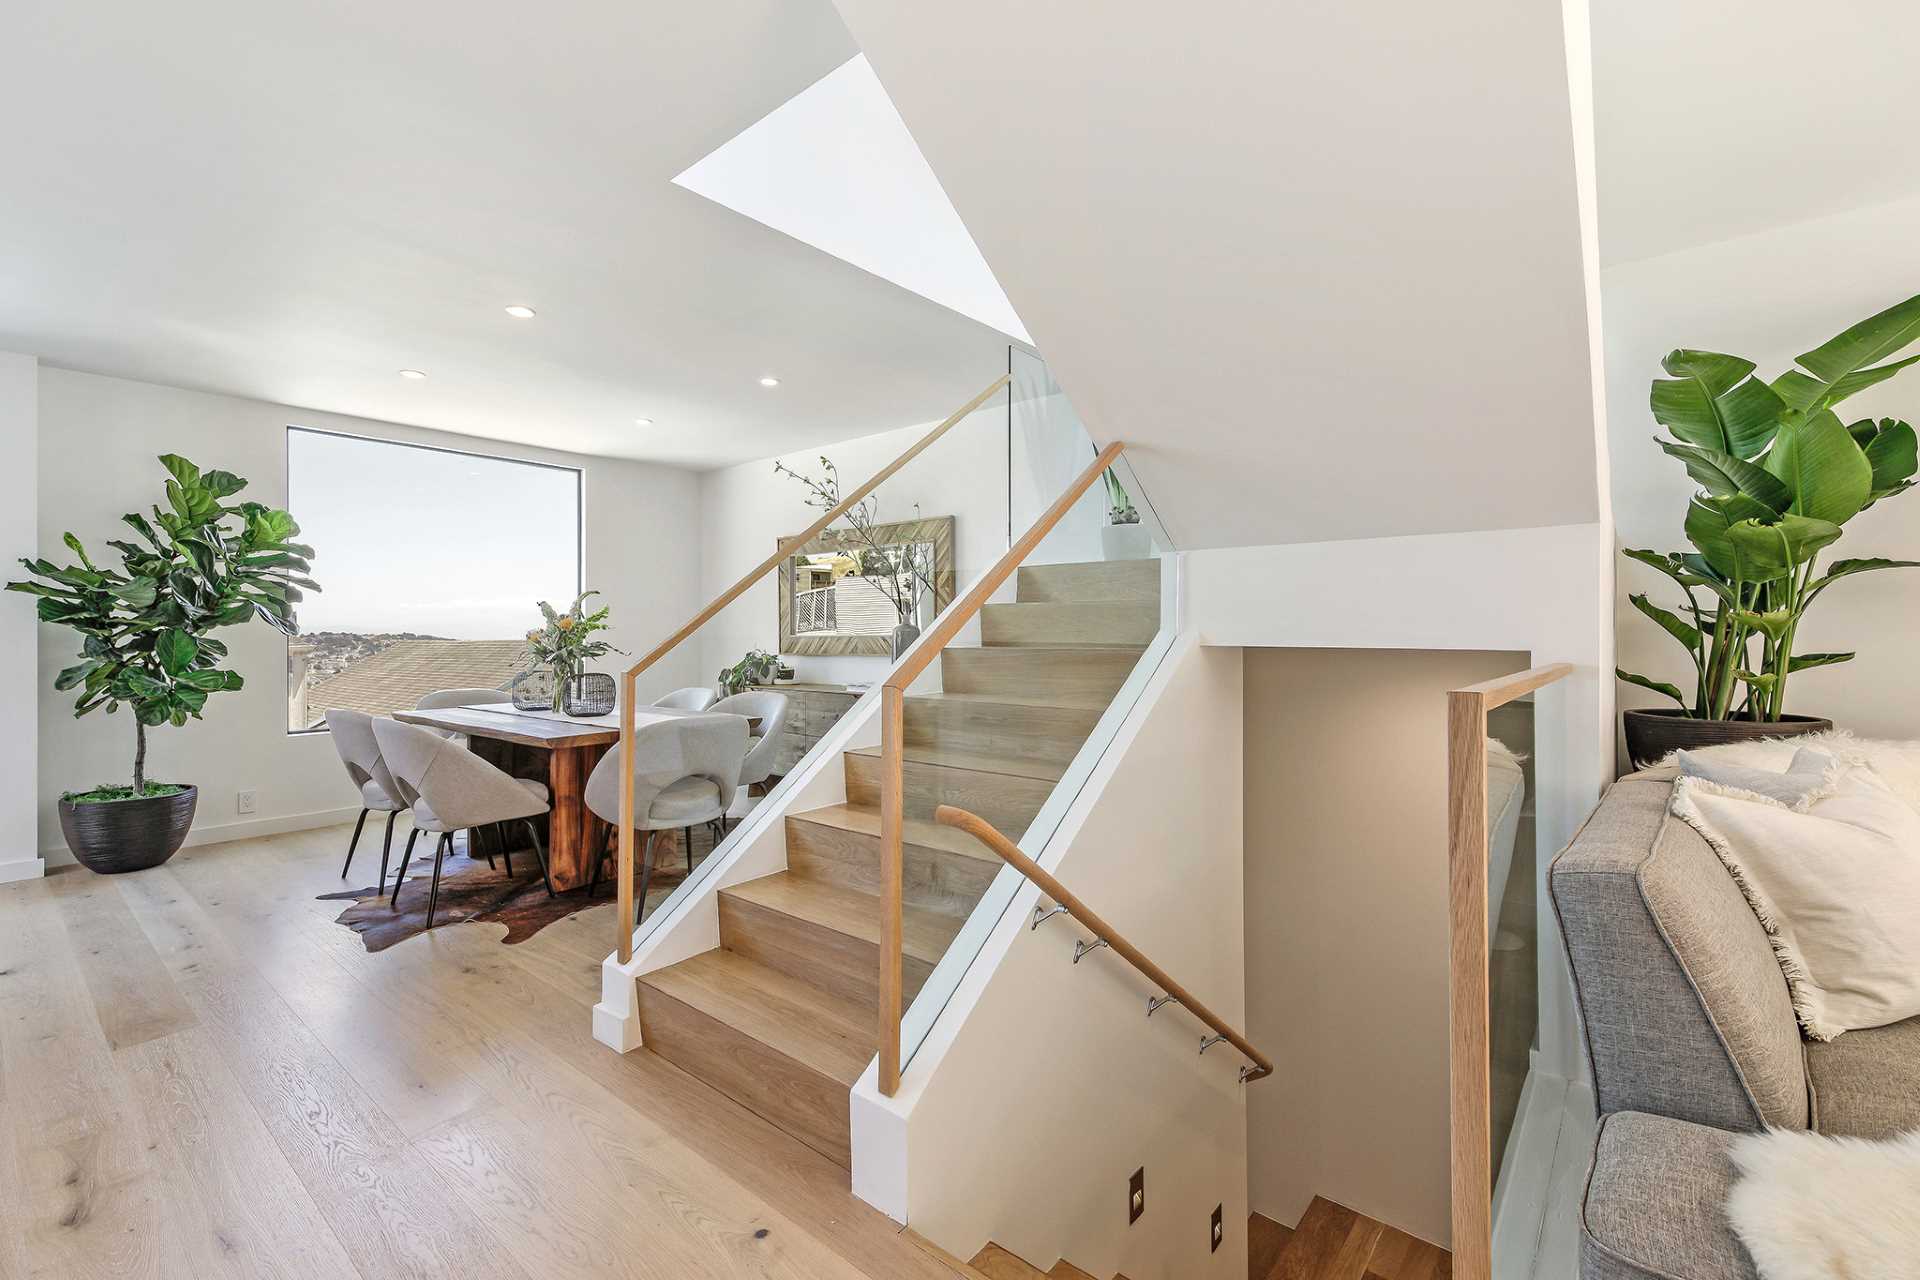 The stairs, separating the living and dining areas, connect the various levels of the home.